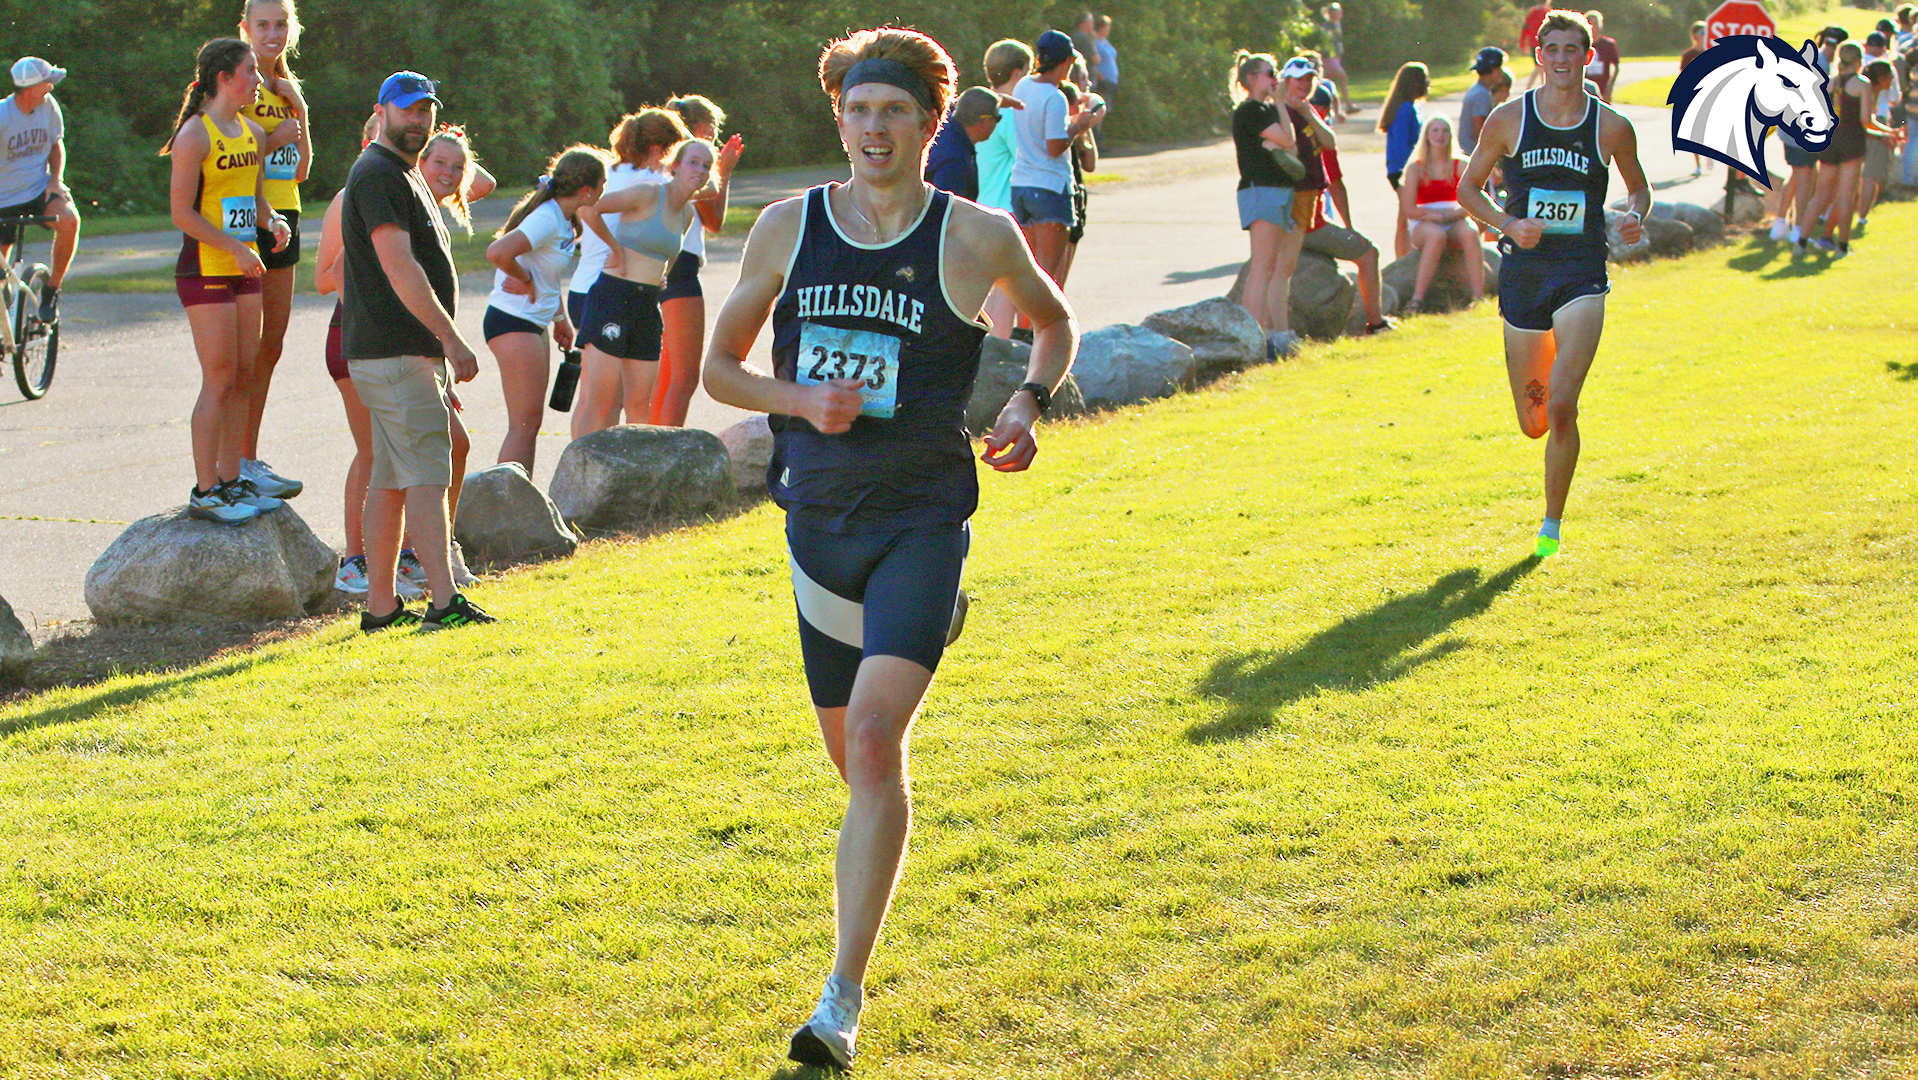 Chargers claim second title of season at Lansing XC Invite